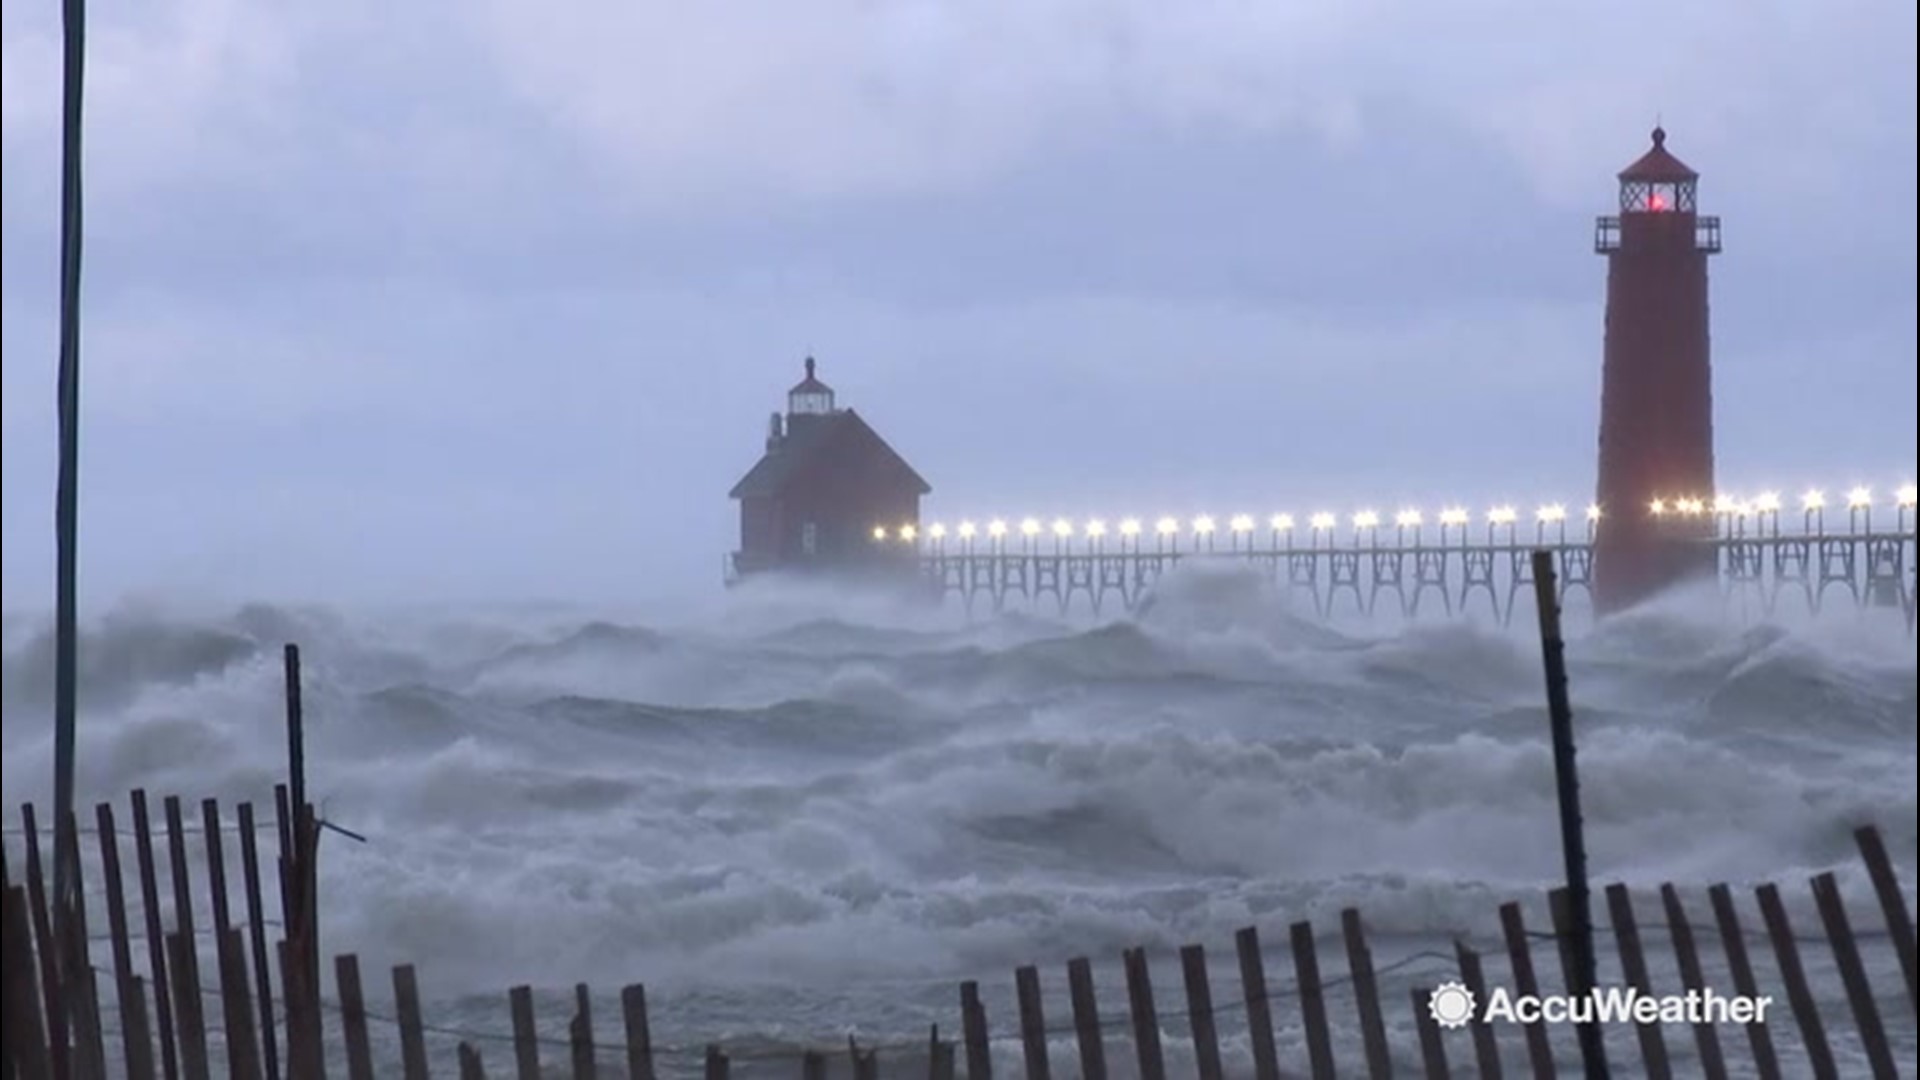 Photographers out getting shots of the incredible waves had to battle strong winds blowing sand in their eyes and lenses. Waves on the lake were 6-9 feet in height and were wreaking havoc on the shoreline in Grand Haven, Michigan, on Oct. 22.